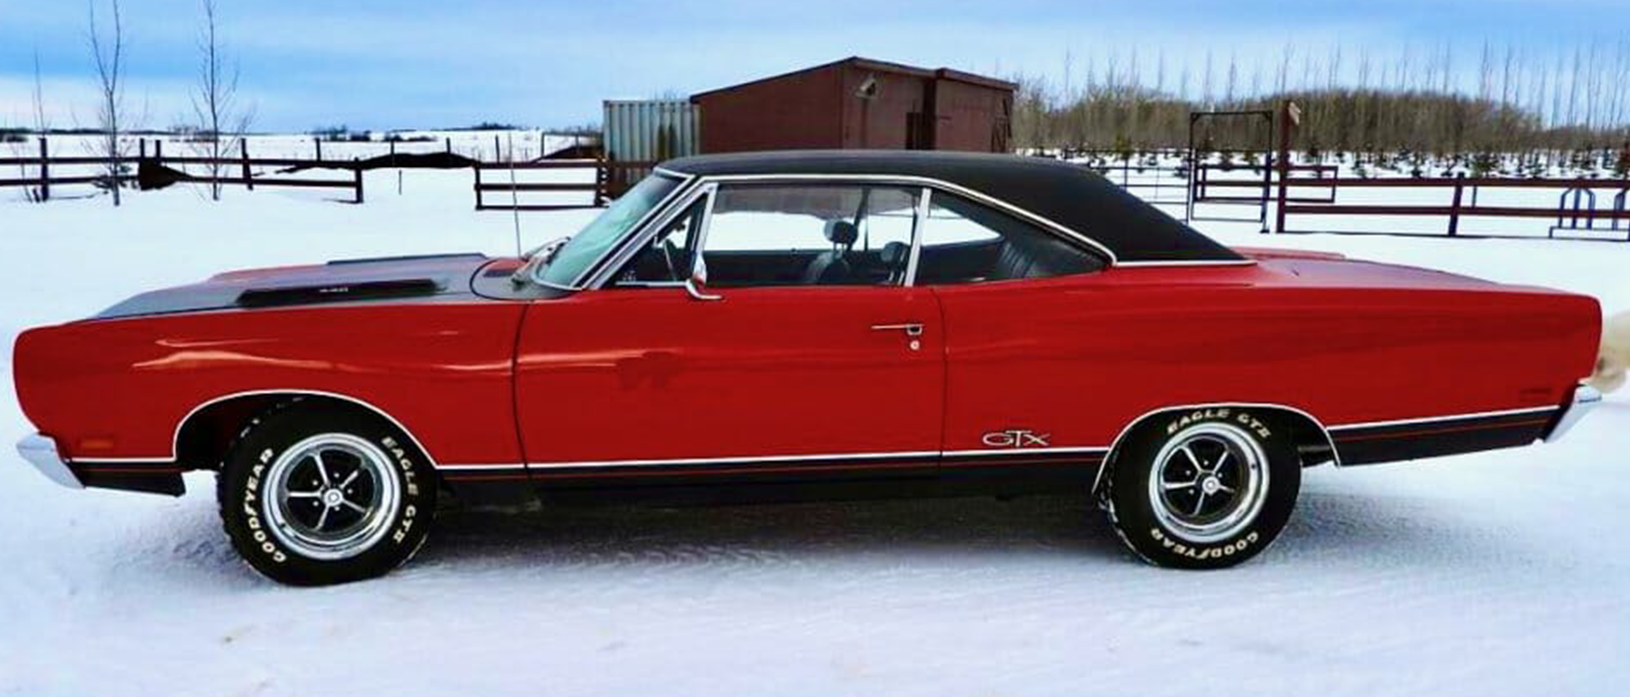 Restored 1969 Plymouth GTX on the Market